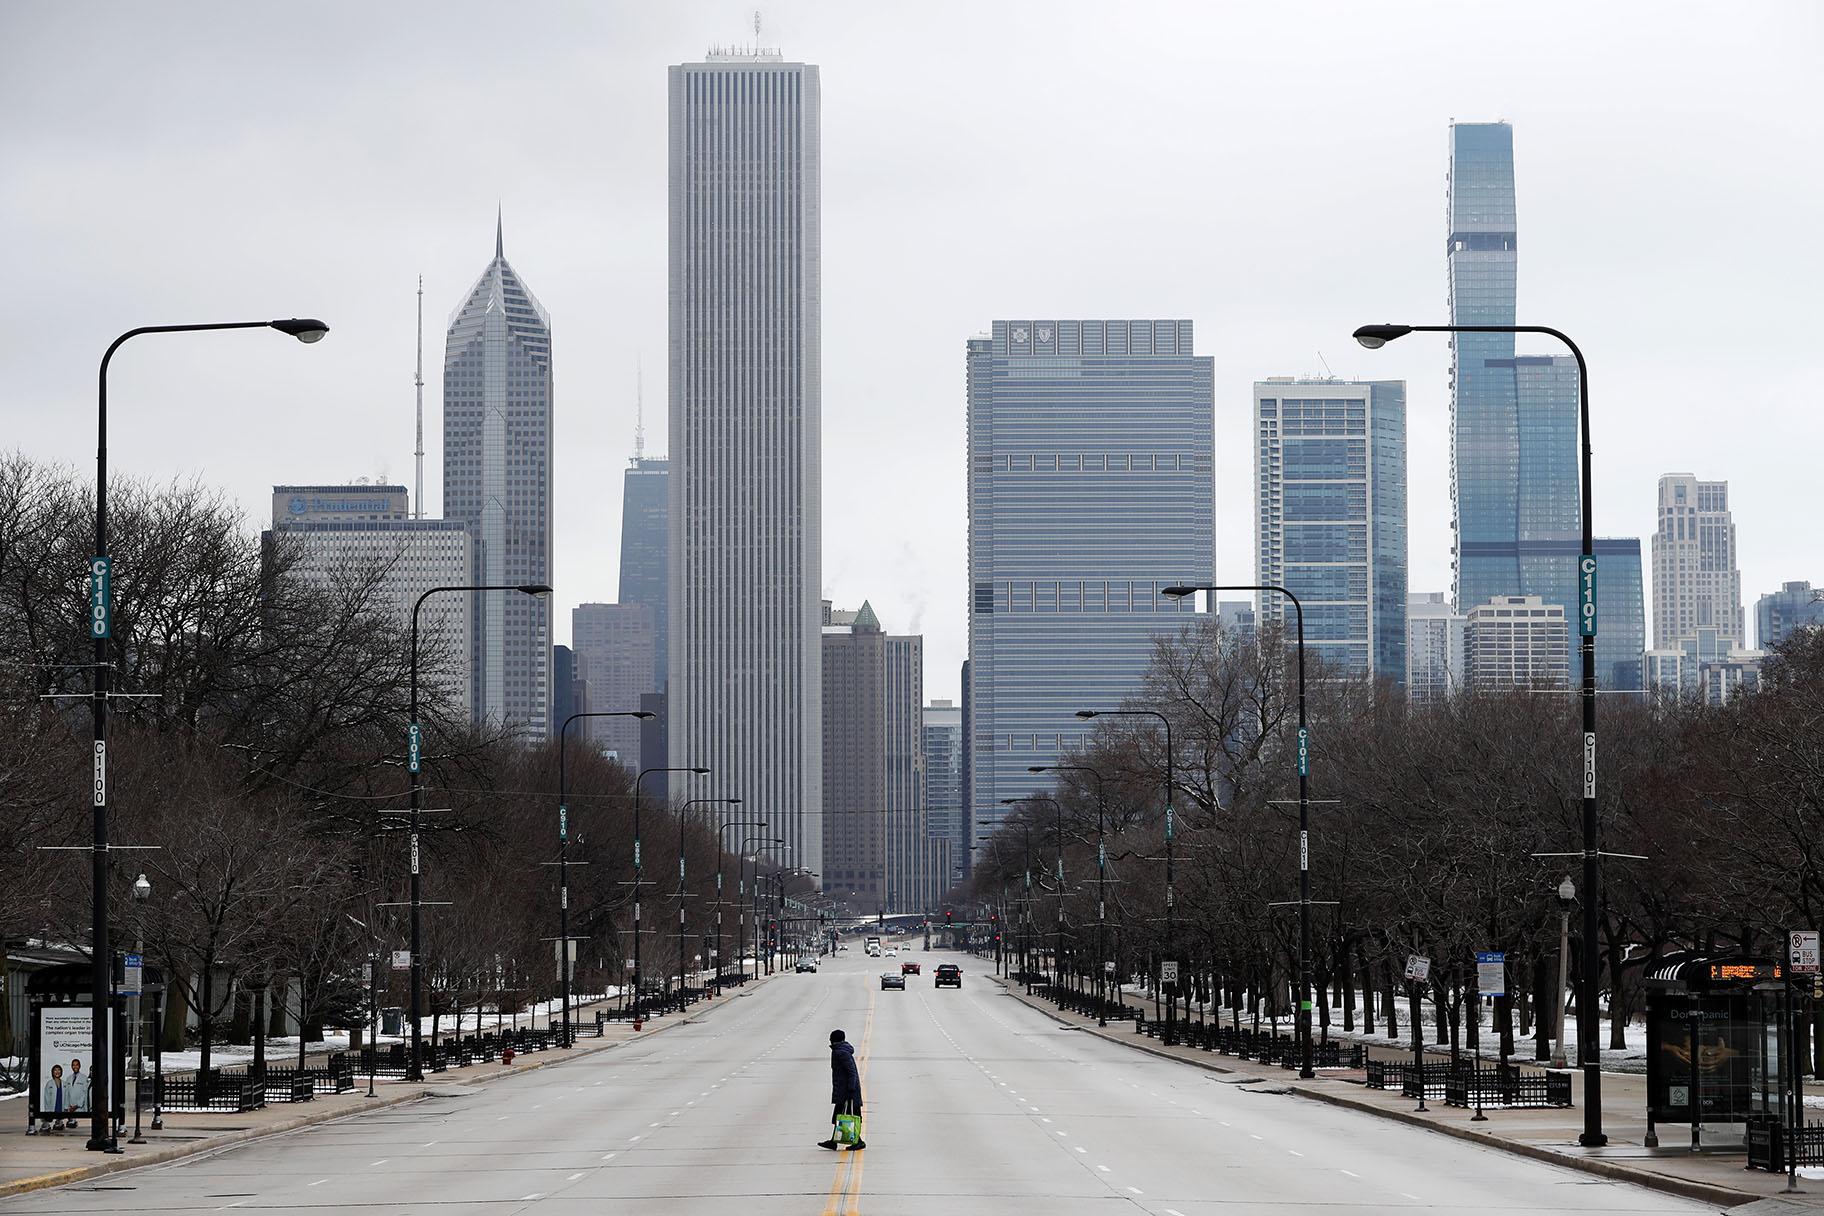 An elderly woman walks across the usually busy Columbus Drive that splits Chicago’s Grant Park in half, on the first work day since Illinois Gov. J.B. Pritzker gave a shelter in place order last week, Monday, March 23, 2020, photo, in Chicago. (AP Photo / Charles Rex Arbogast)